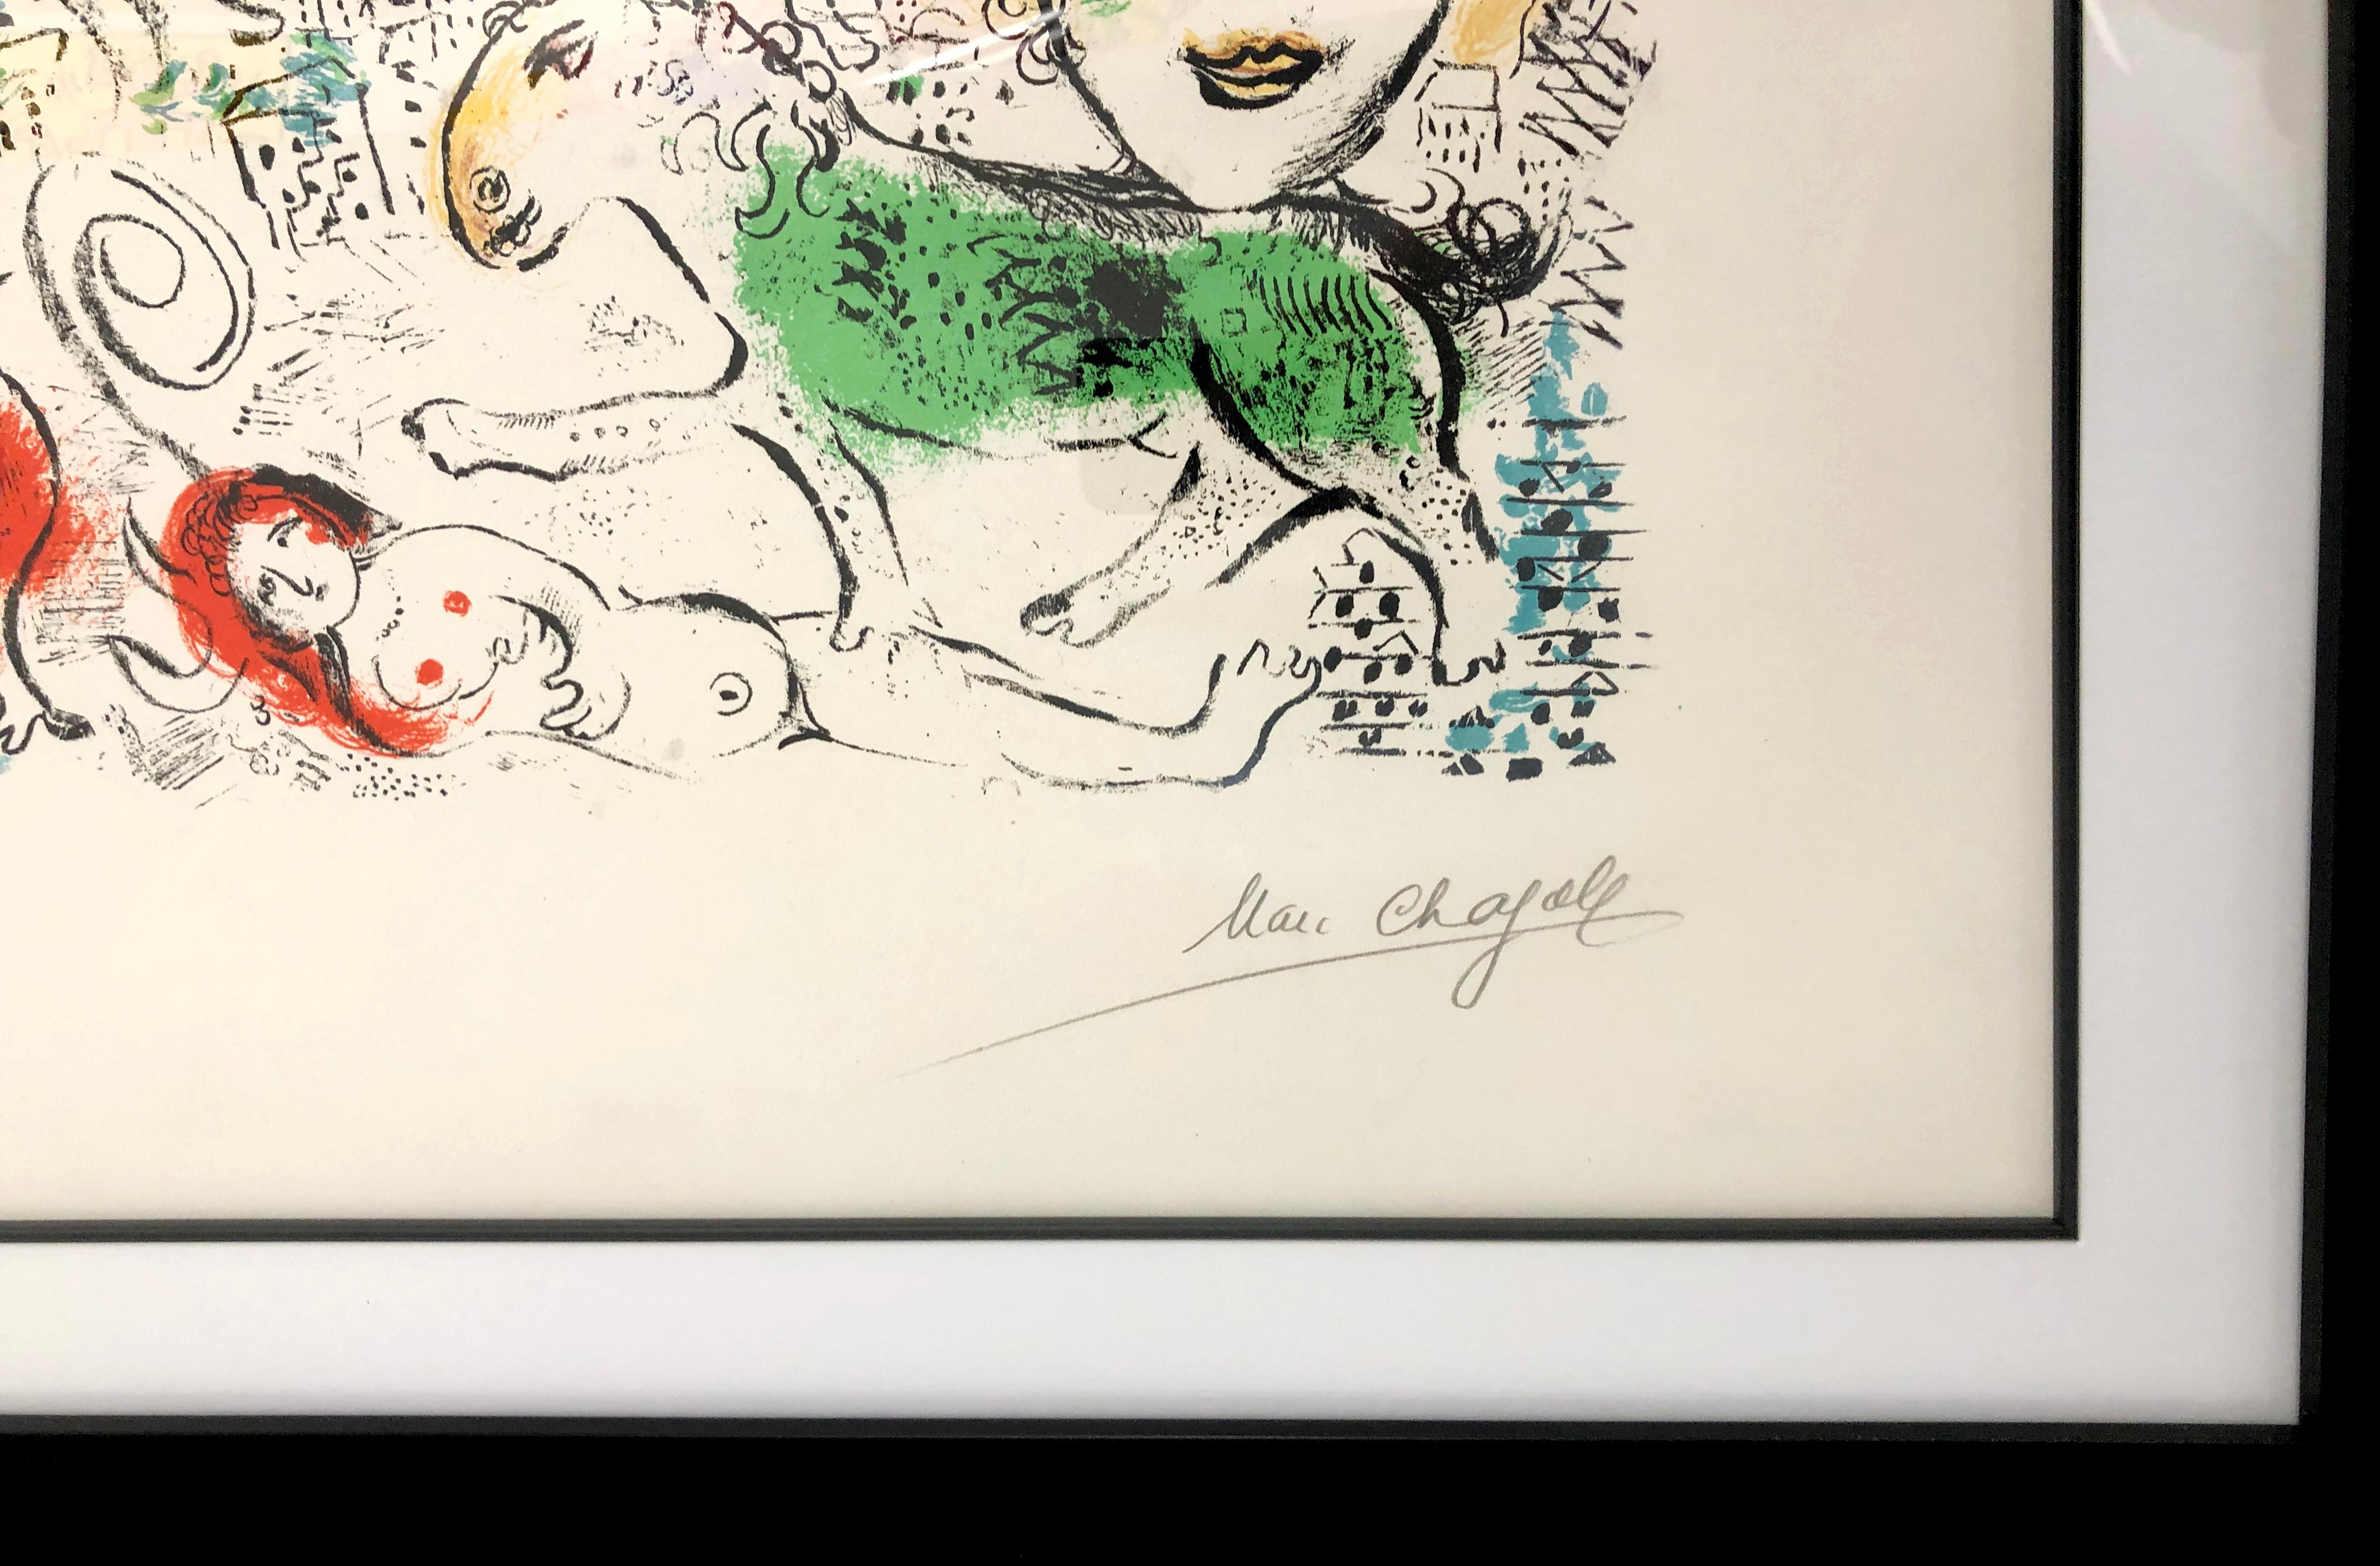 UNTITLED FROM XXe SIECLE (MOURLOT 699) - Print by Marc Chagall